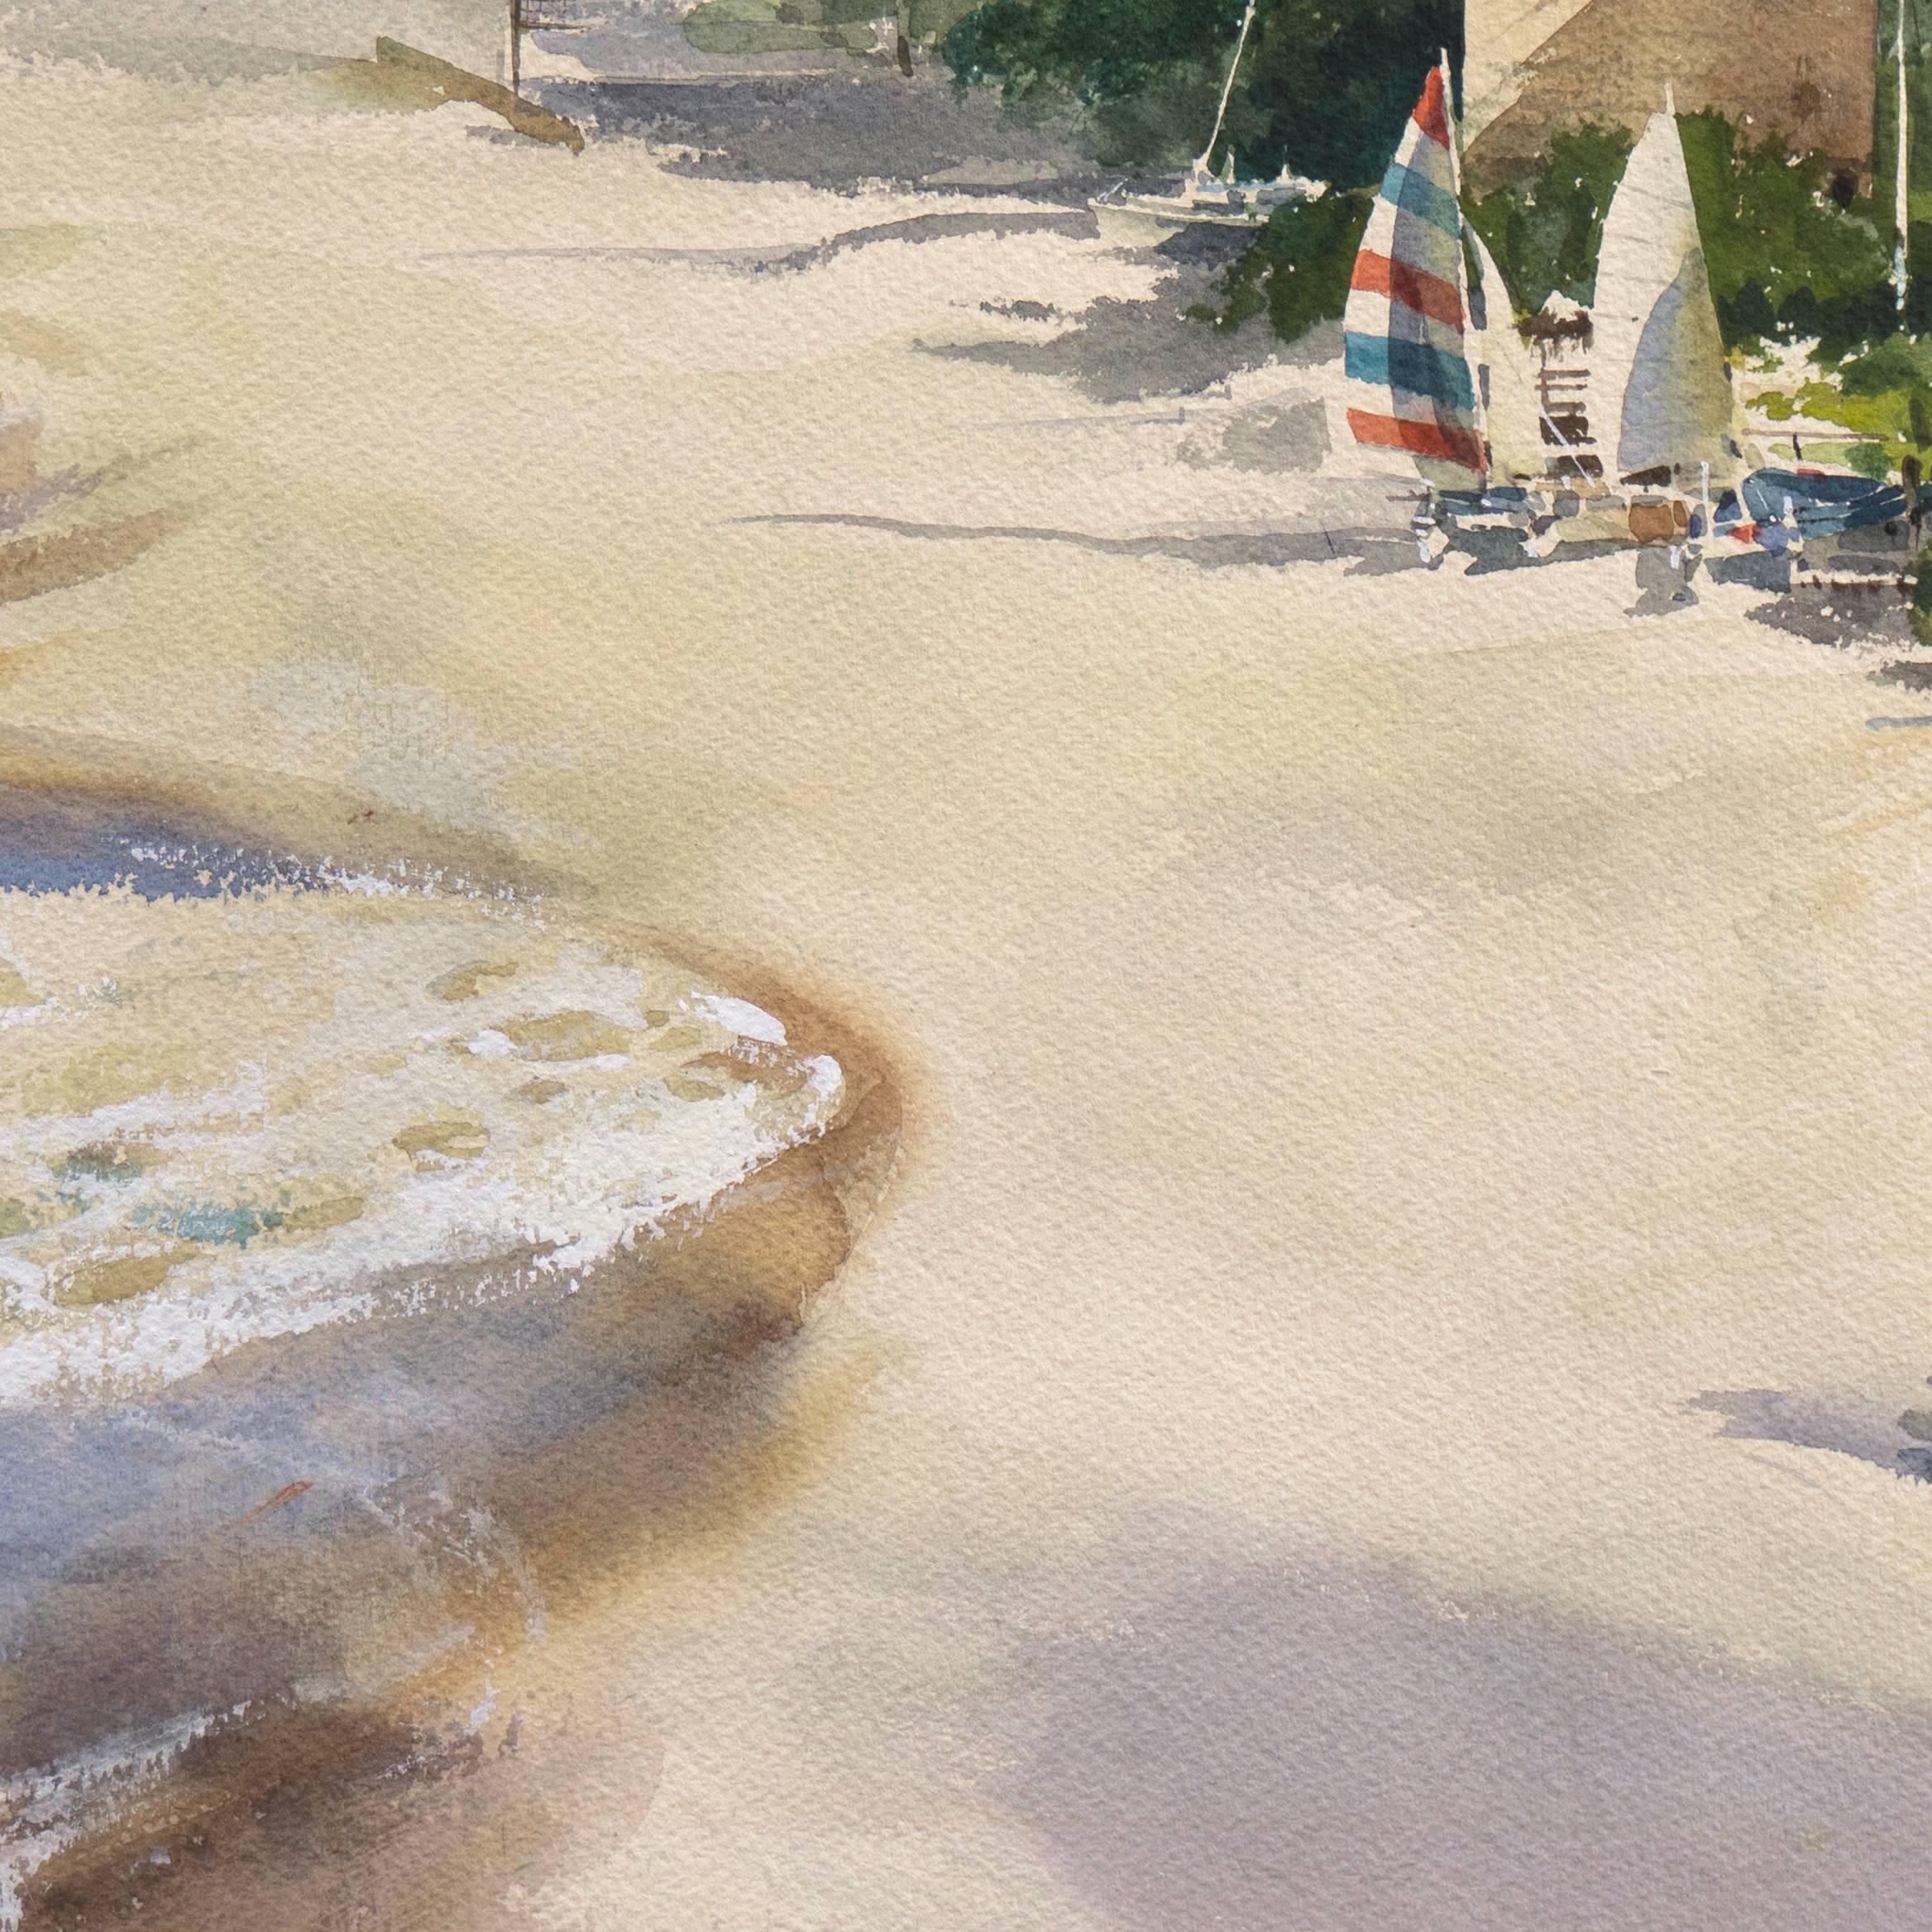 An elegant figural coastal scene showing a view of a morning volleyball game in progress on the sandy beach off 8th Street, Laguna Beach. A delicately painted and atmospheric work by this award winning California watercolorist and muralist.

Signed